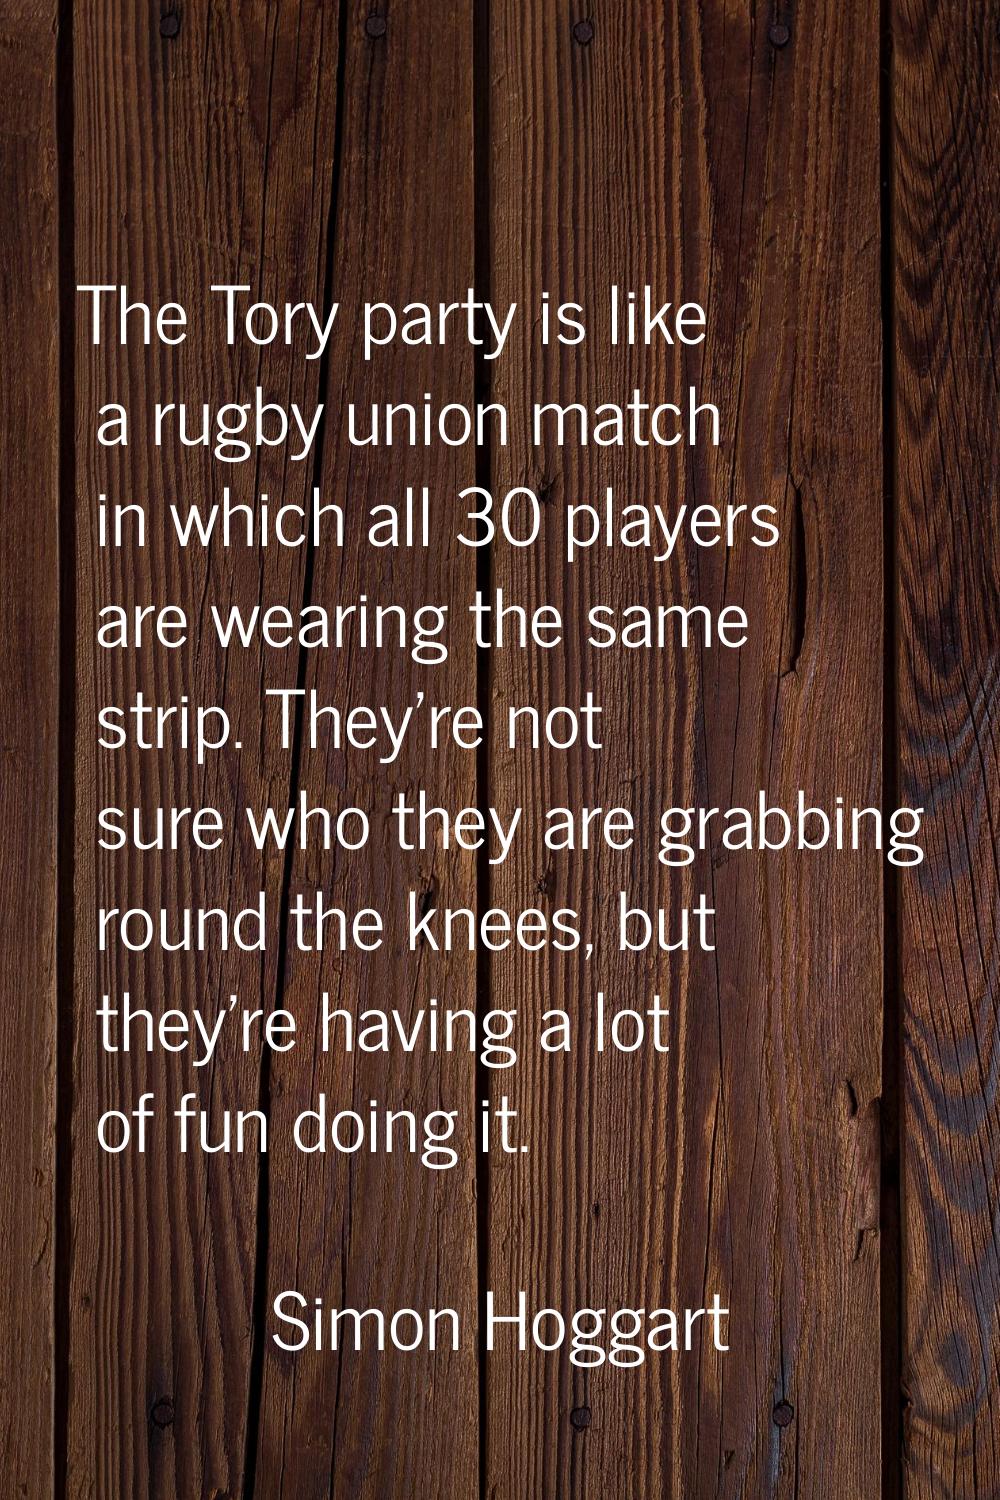 The Tory party is like a rugby union match in which all 30 players are wearing the same strip. They